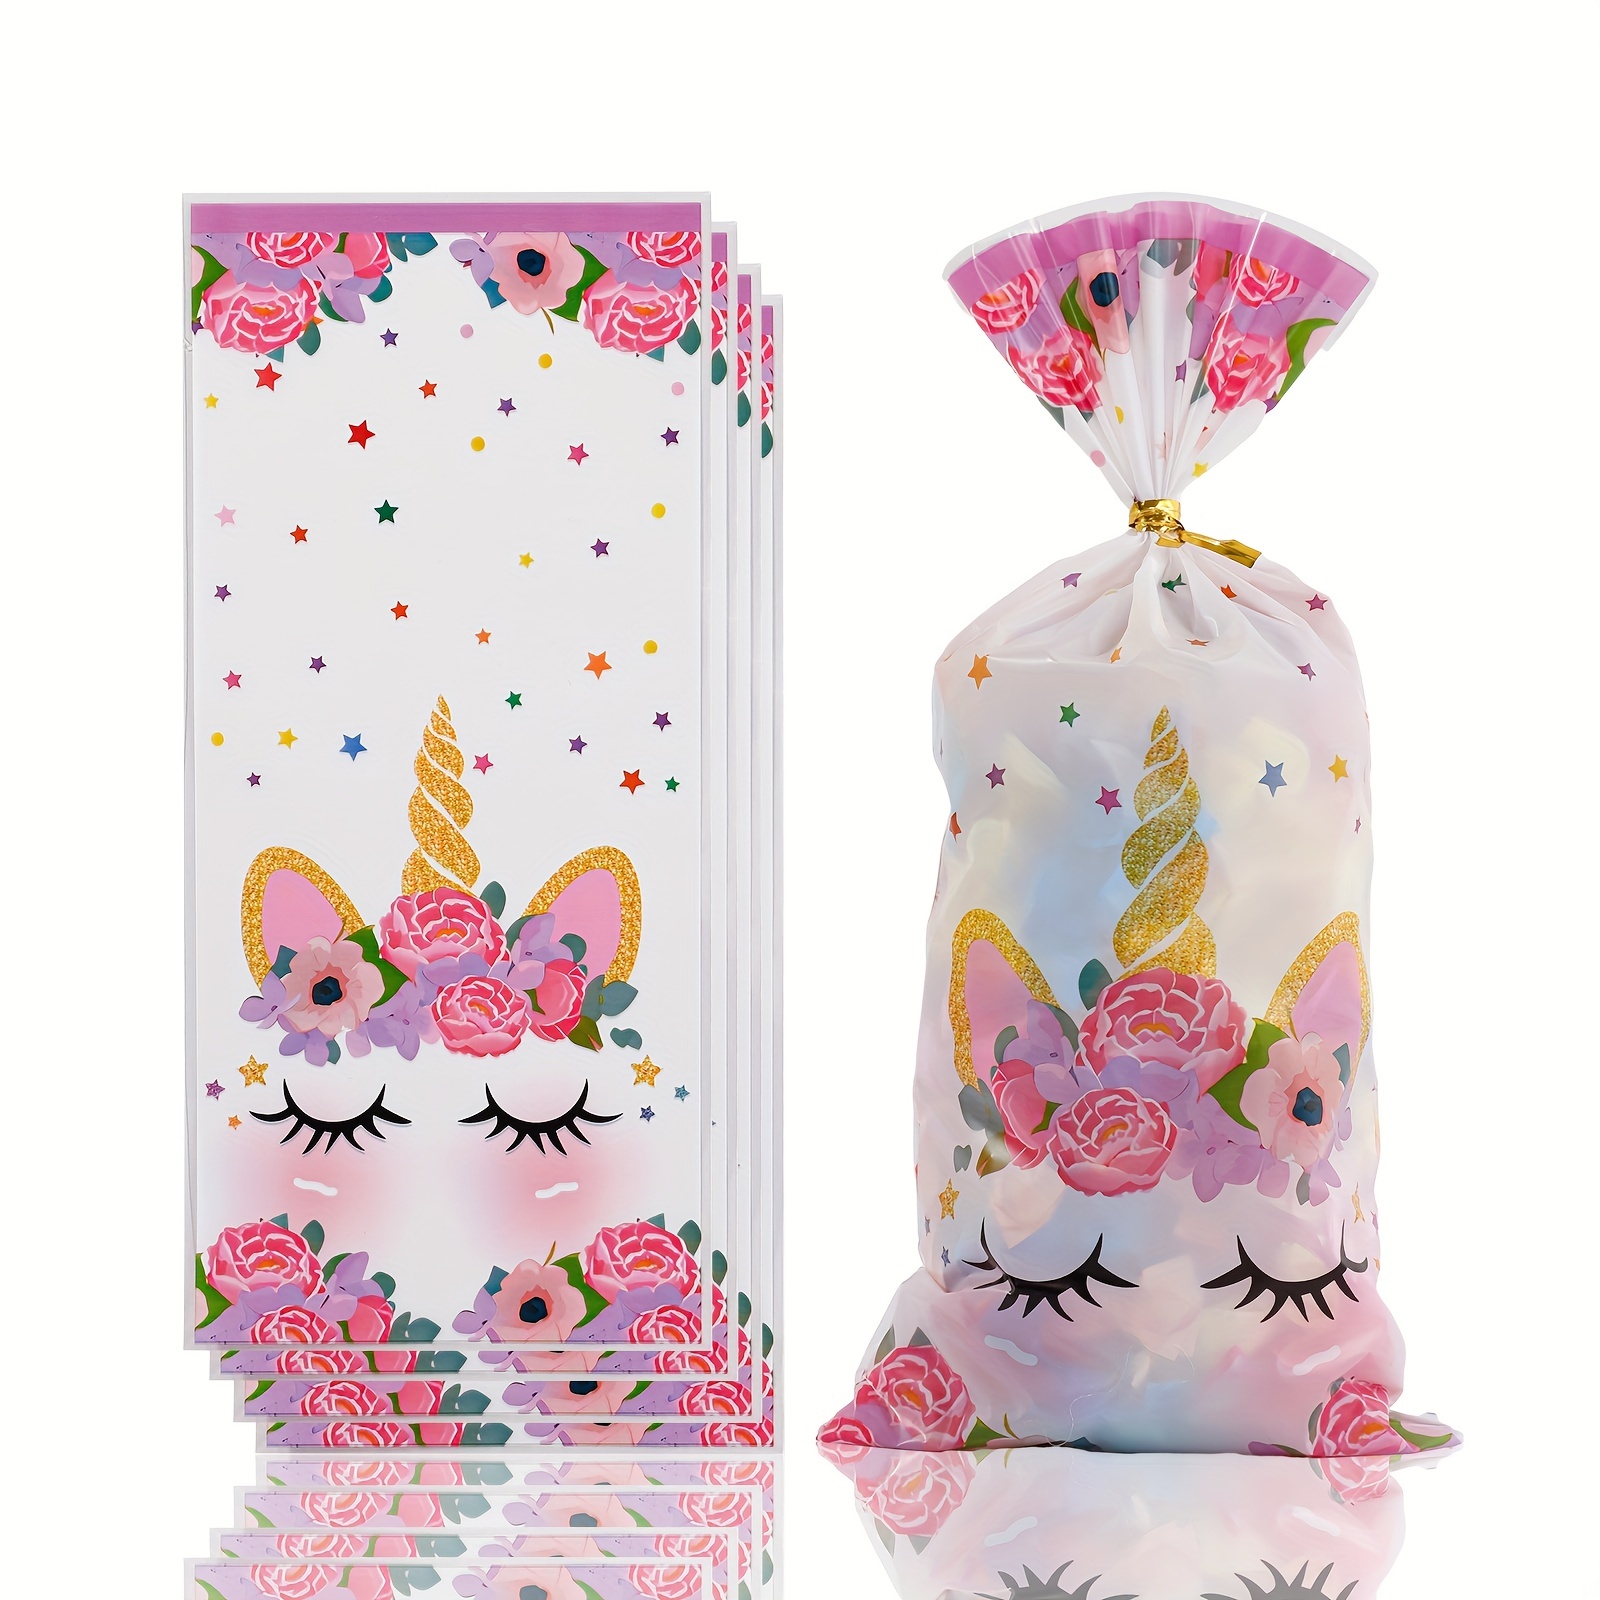 10pcs/set Plastic Gift Wrapping Bag, Cartoon Unicorn & Rainbow Pattern Gift  Bag For Party